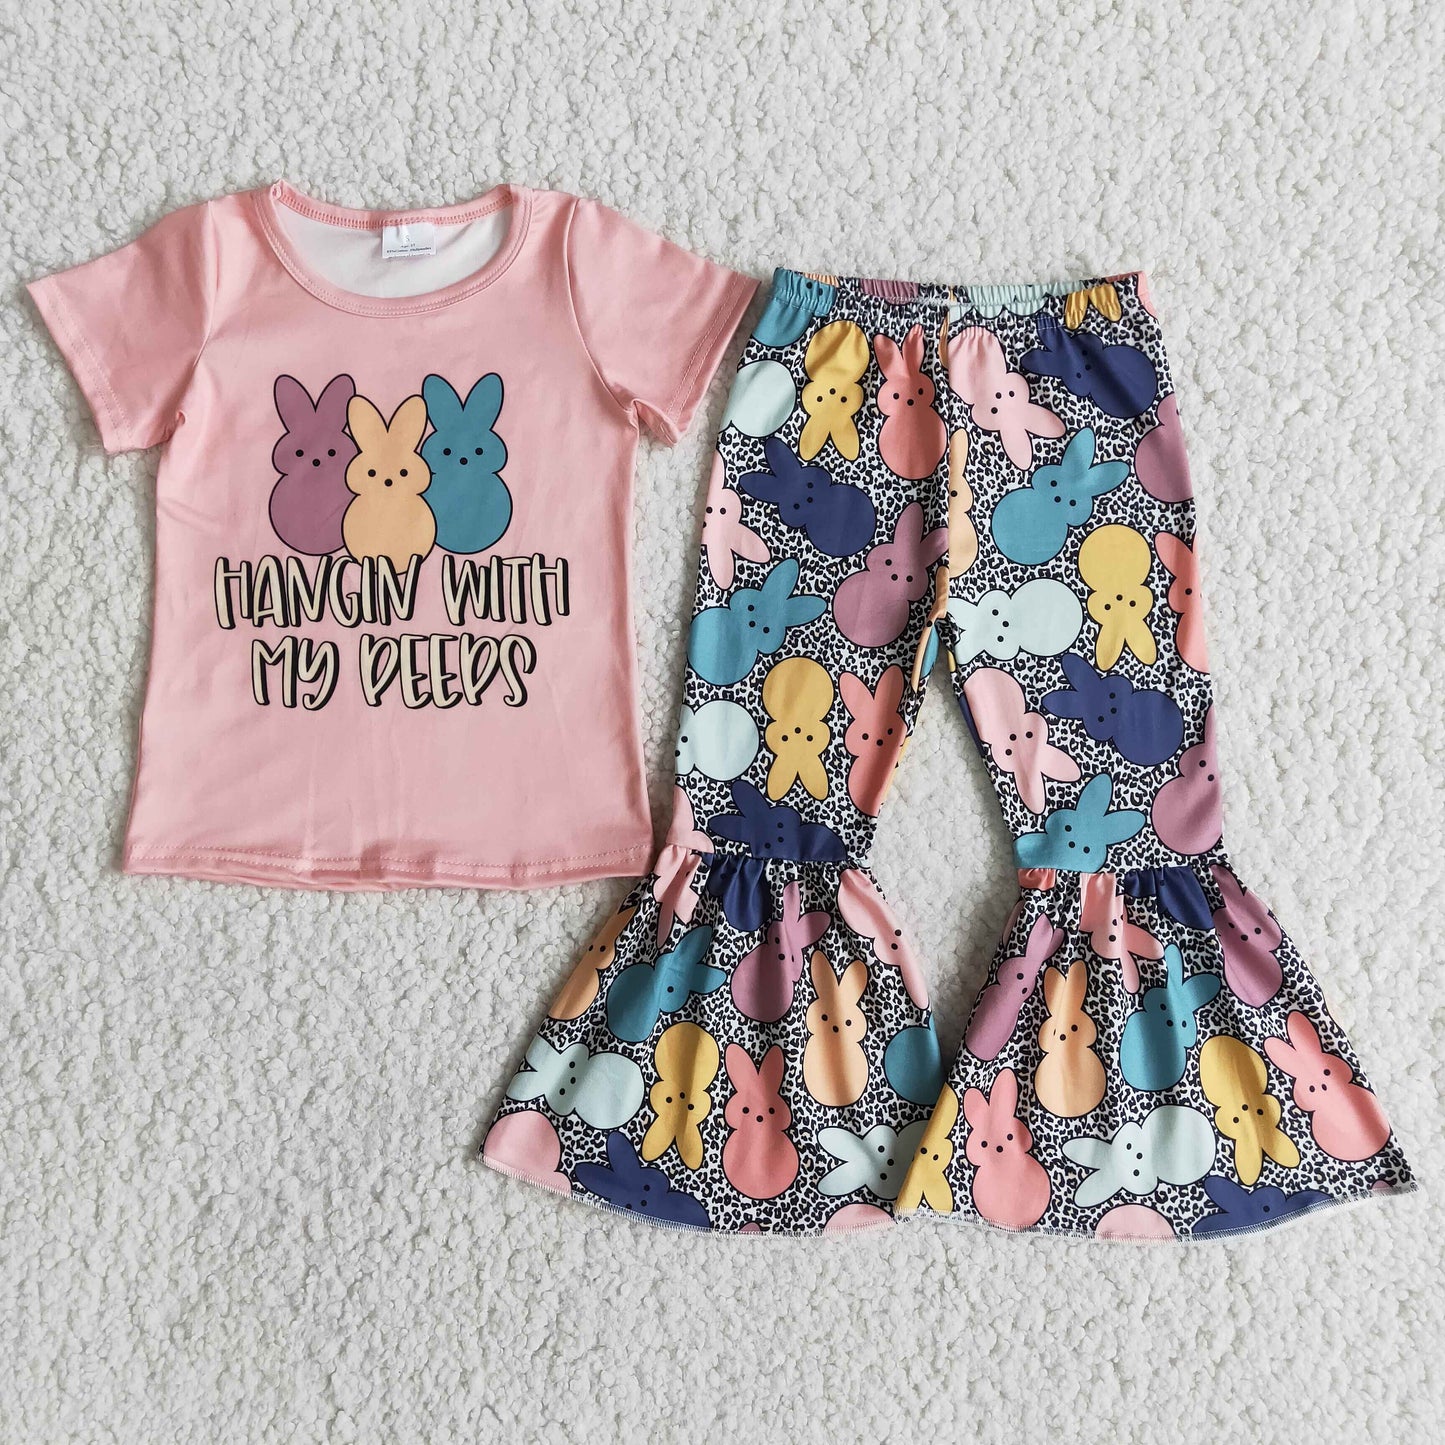 3 cute bunnies Easter outfit for baby girl bell bottom trousers